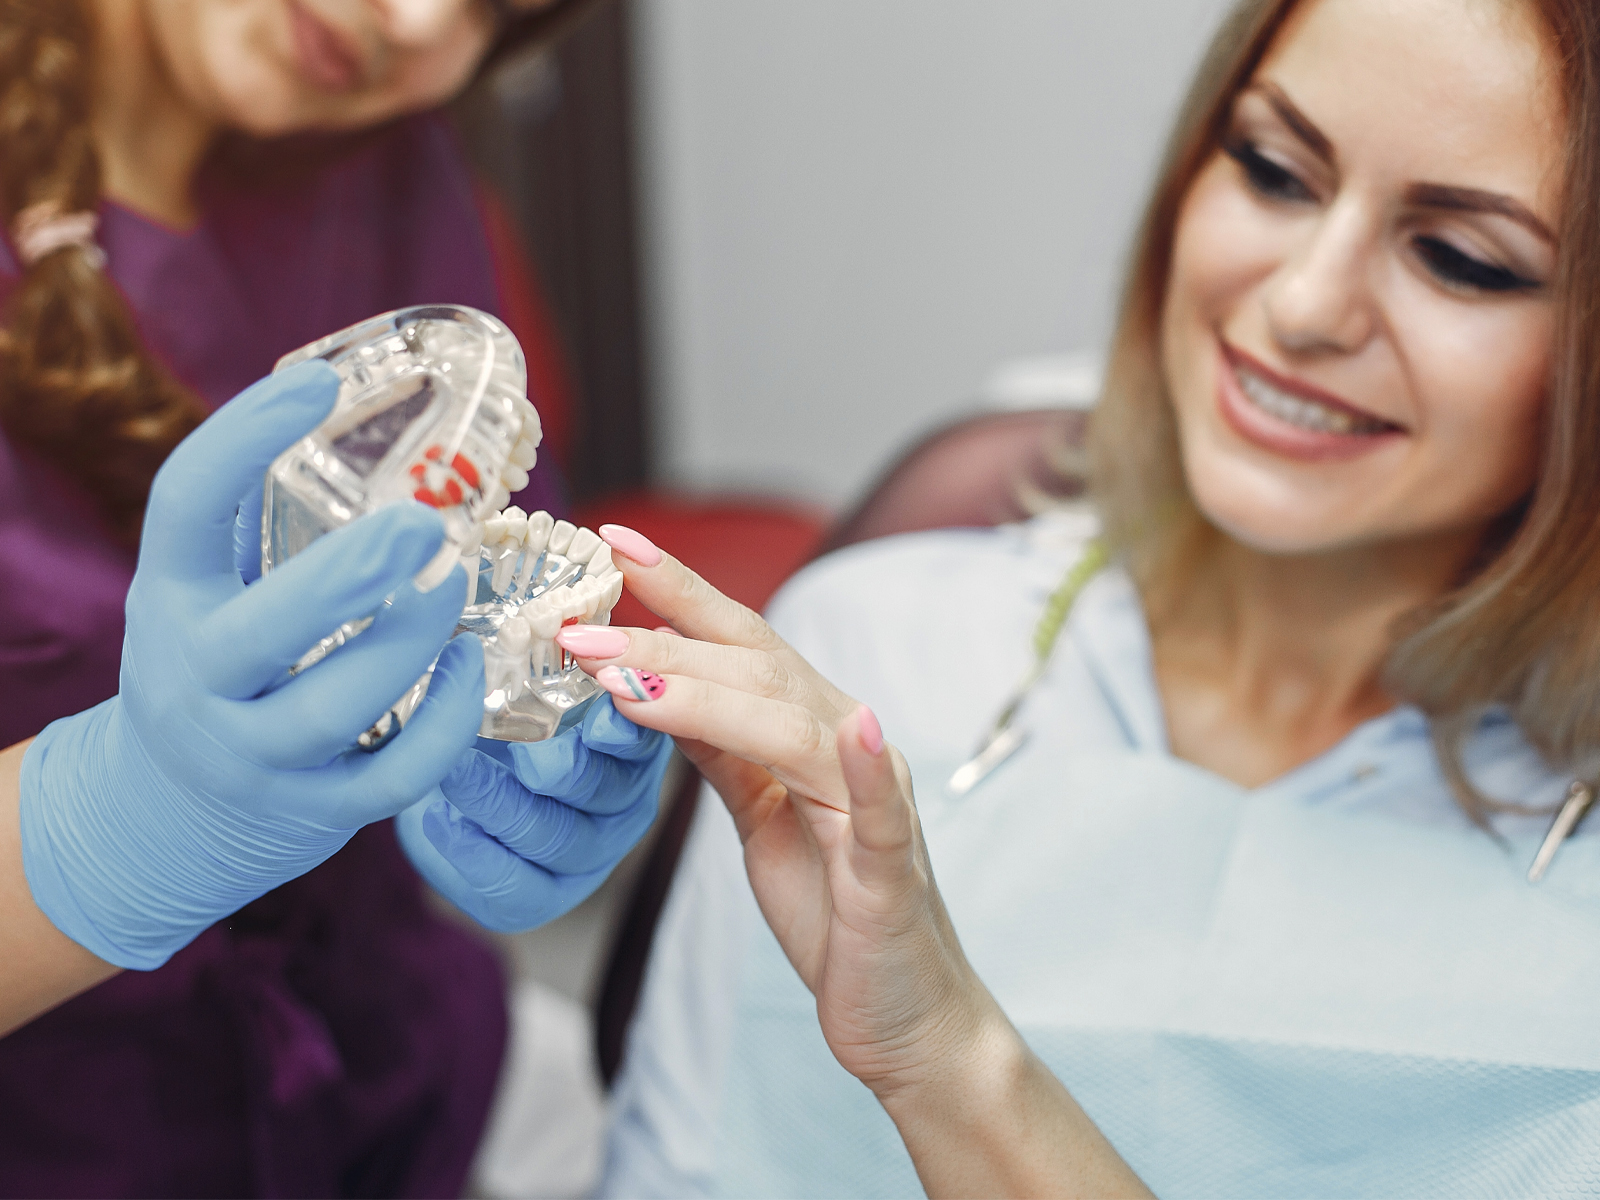 Common Partial Dentures Problems And How To Fix Them